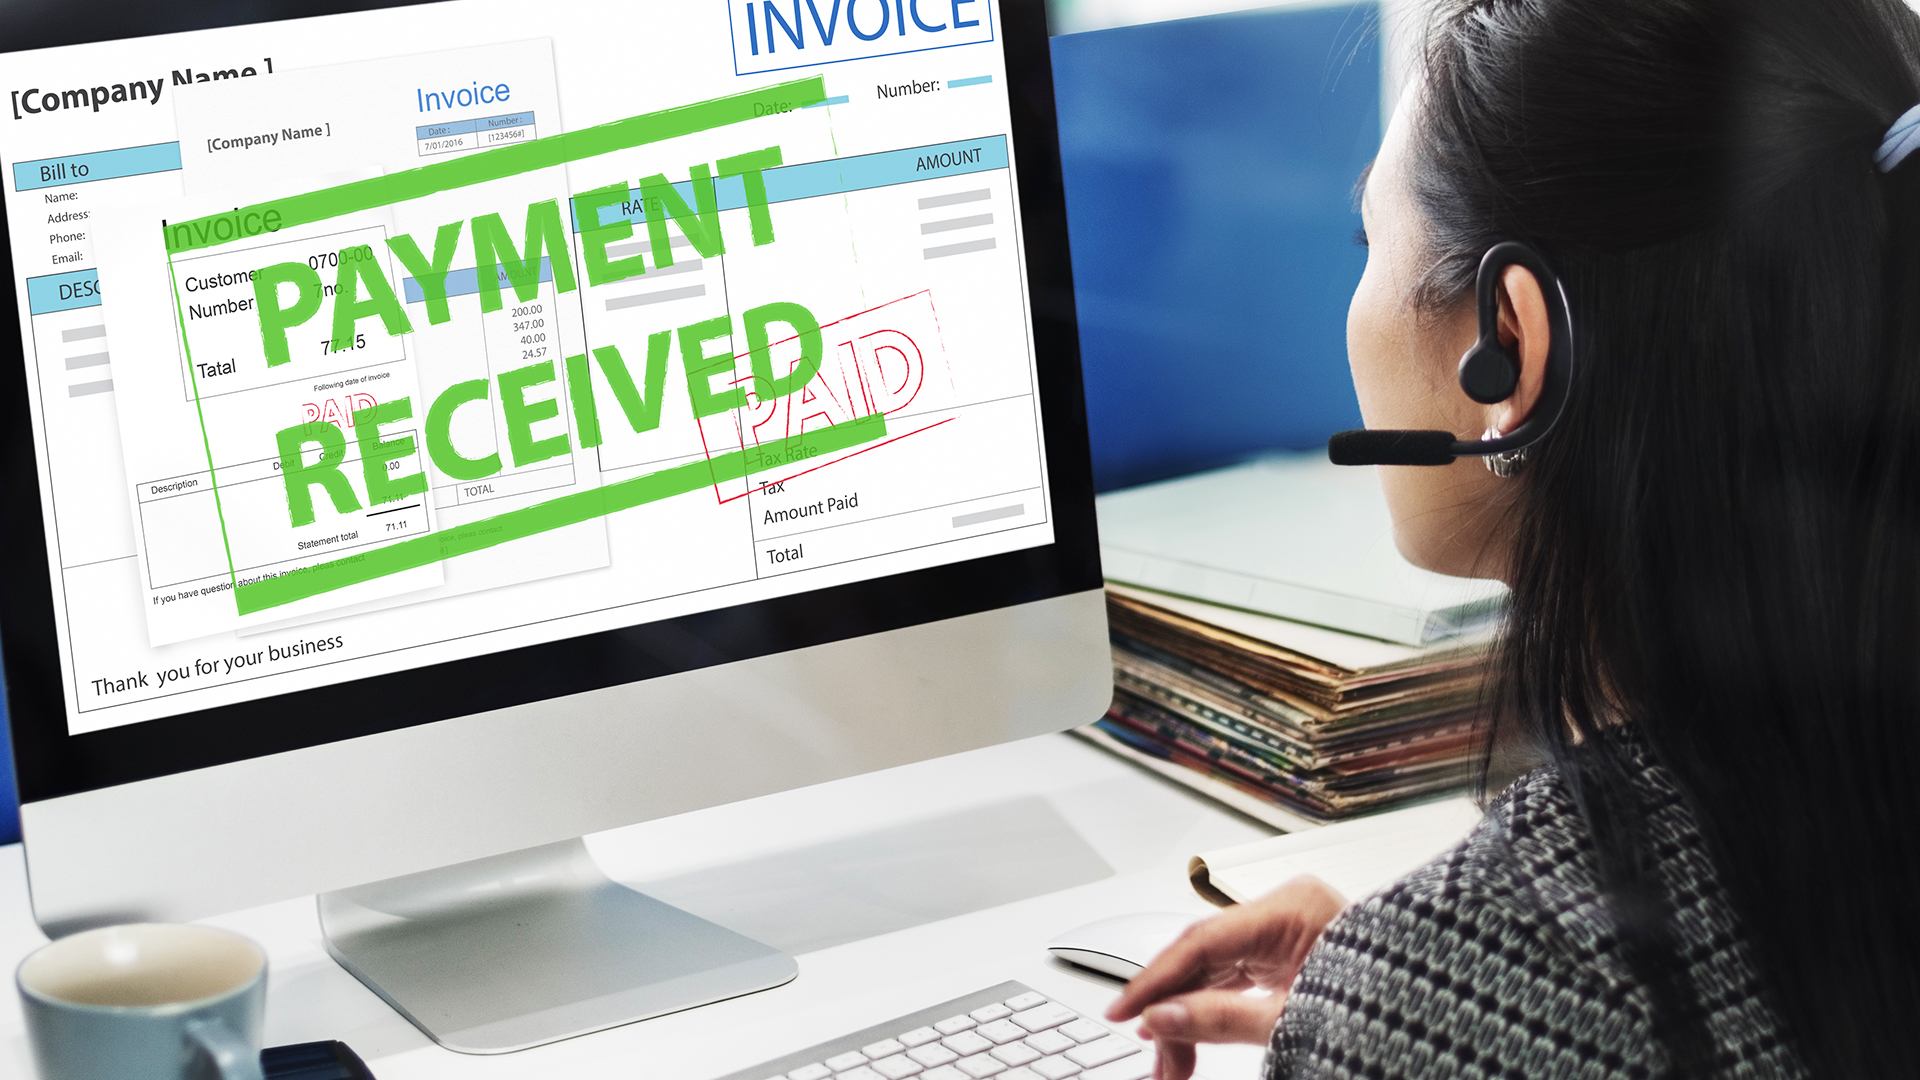 It is time to clean up your old Accounts Receivable